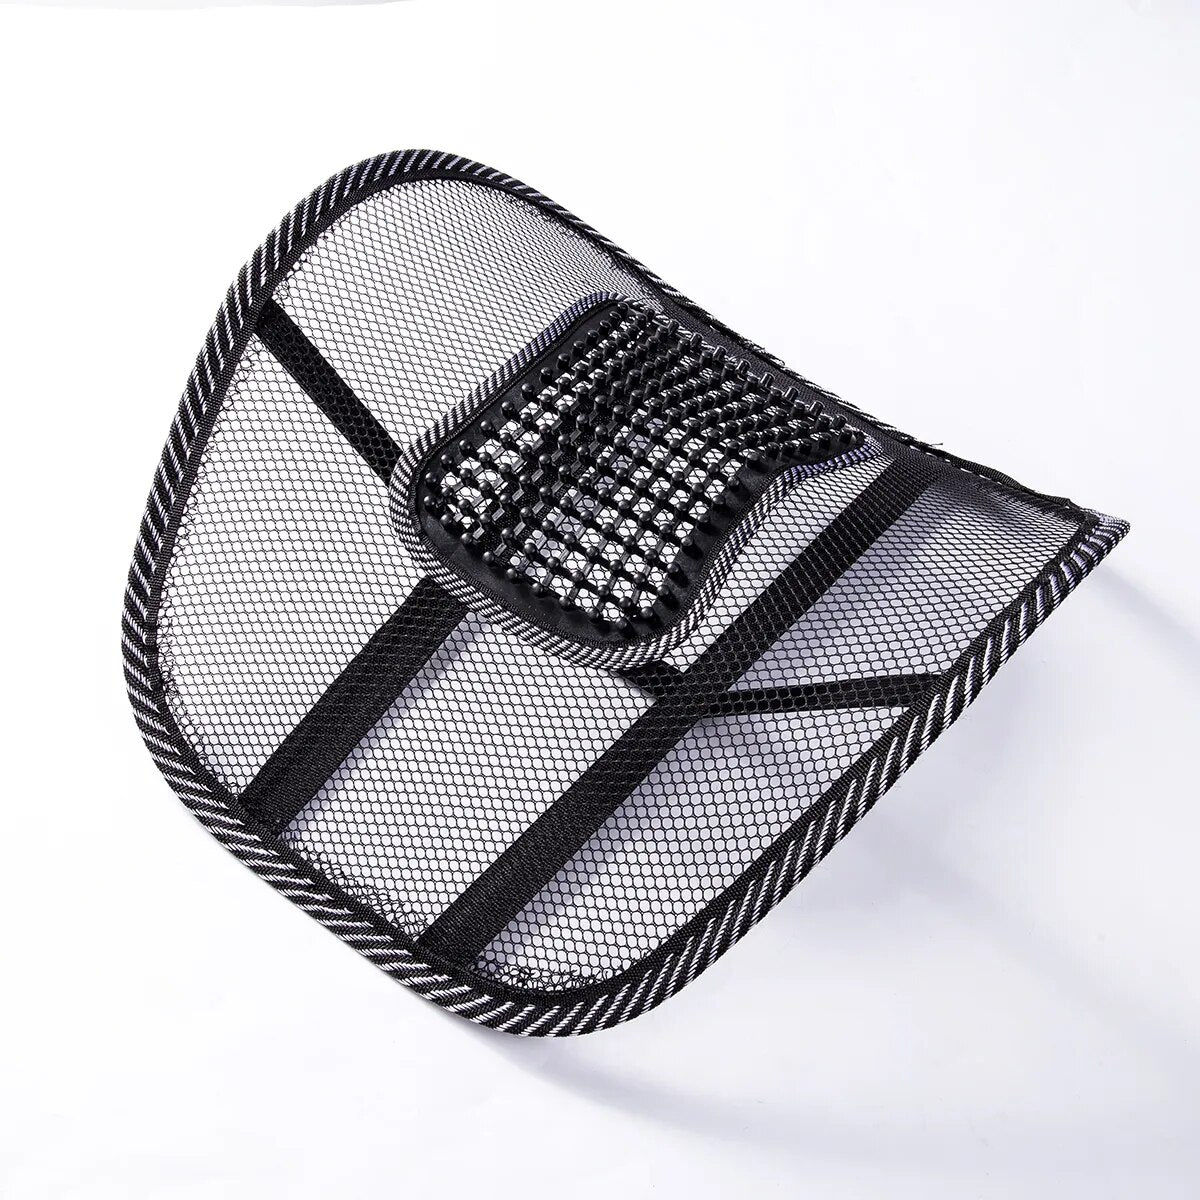 Office Chair Lumbar Back Support Spine Posture Correction